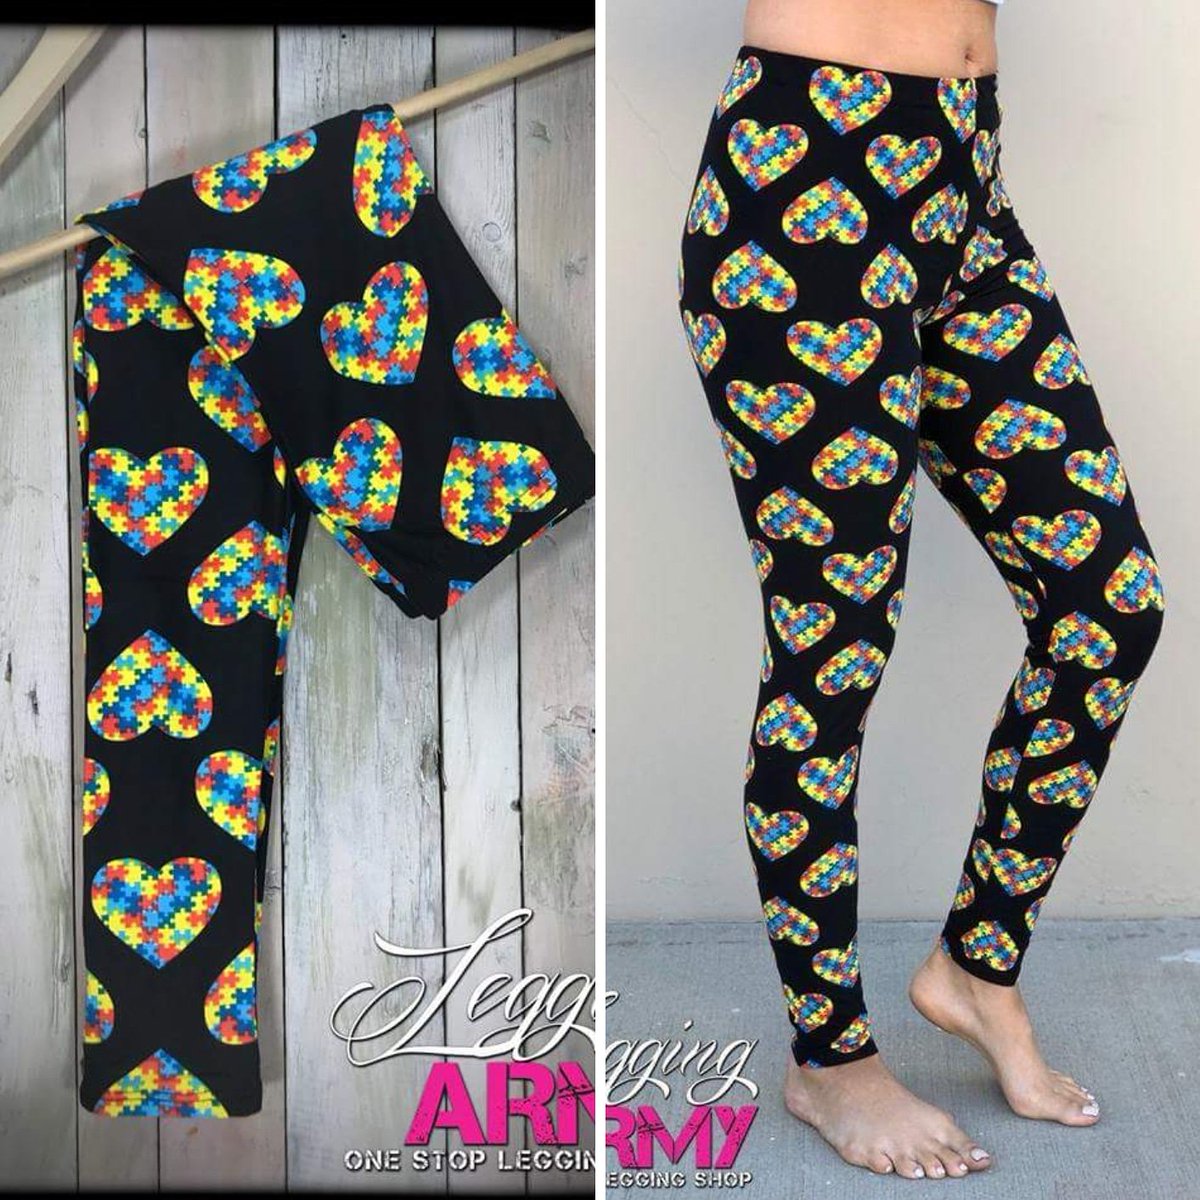 Piece of My Heart was just RESTOCKED!!!
OS
PS
Kids
3x5x(24-32)

Shop Now: leggingarmy.com/#AngelzLeggingz

#angelzleggingz #leggingarmy #autism #autismawareness #leggings #womensclothing #onesize #plussize #kids #womensfashion #supportautism